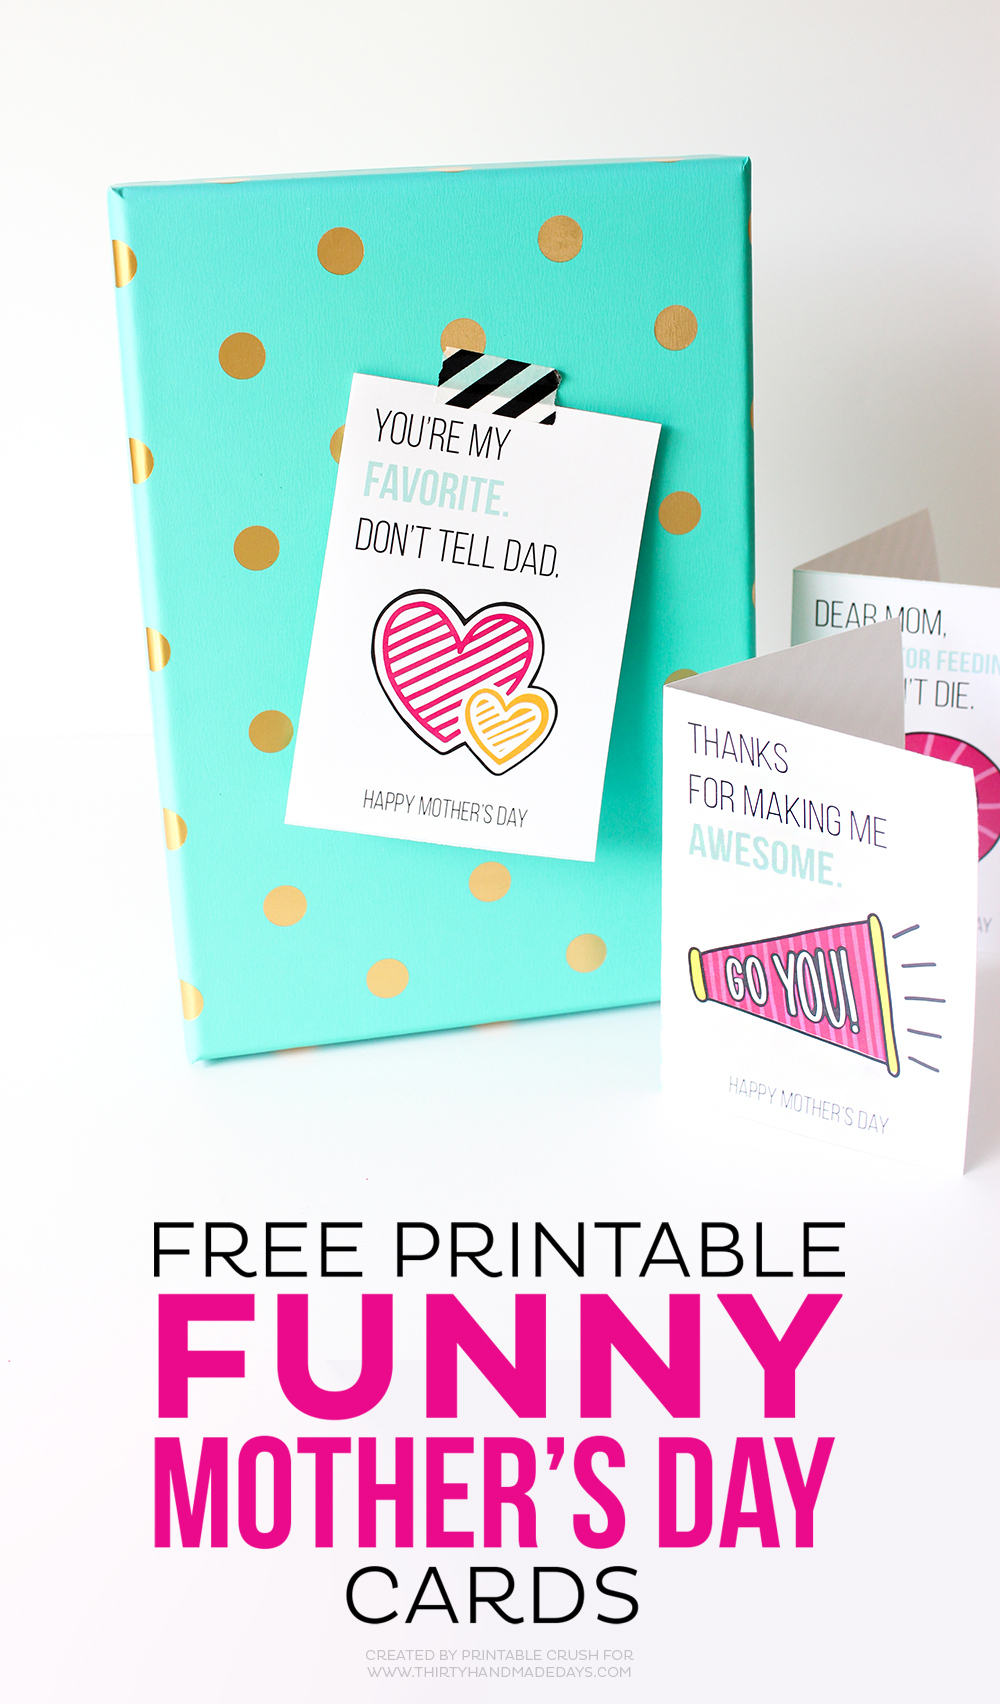 Printable Mother&amp;#039;S Day Cards regarding Free Printable Funny Mother&amp;amp;#039;s Day Cards